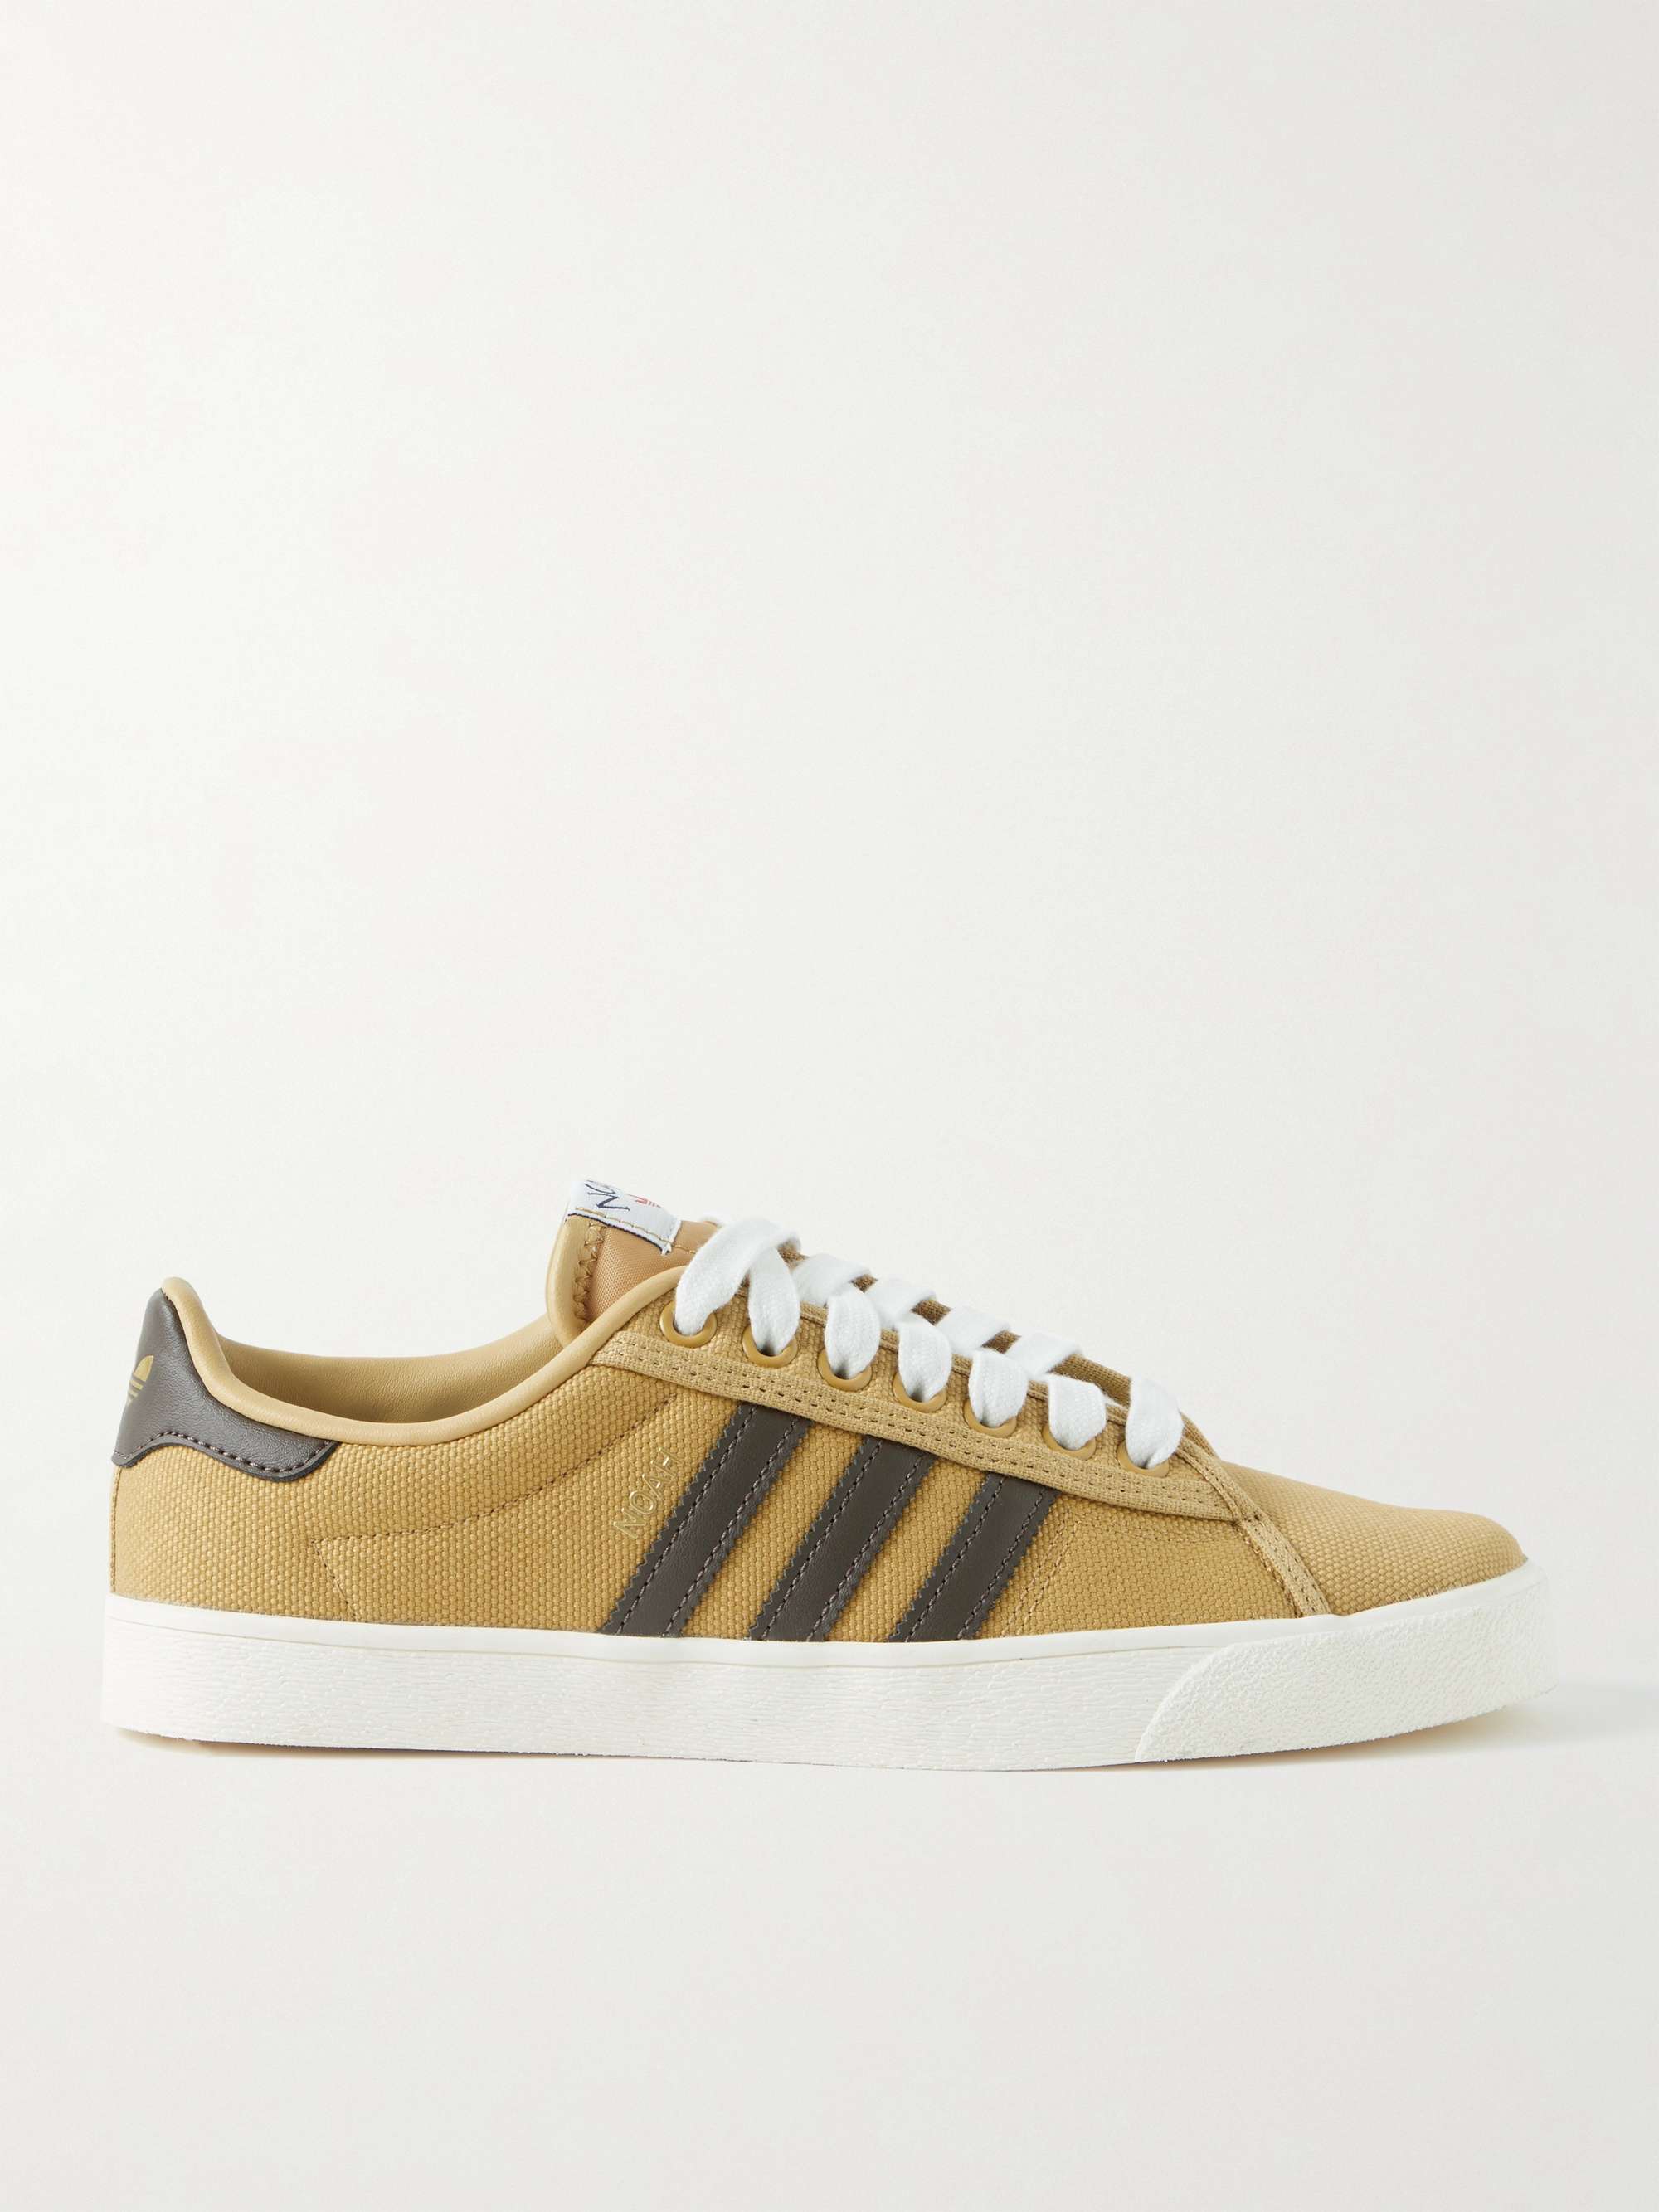 Brown + Noah Adria Leather-Trimmed Canvas Sneakers | ADIDAS CONSORTIUM | MR  PORTER